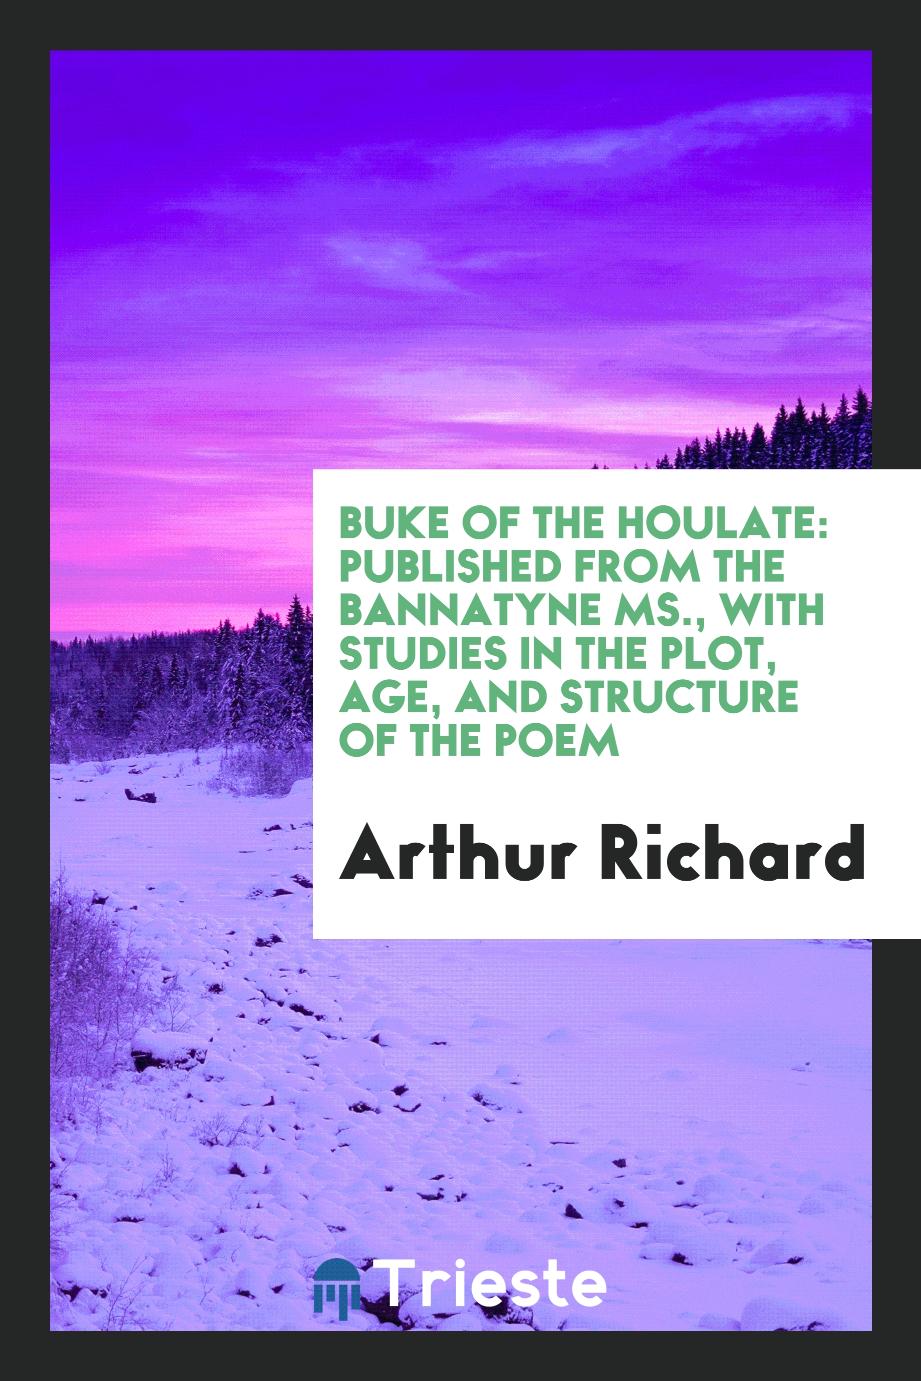 Buke of the Houlate: Published from the Bannatyne MS., with Studies in the Plot, Age, and Structure of the Poem